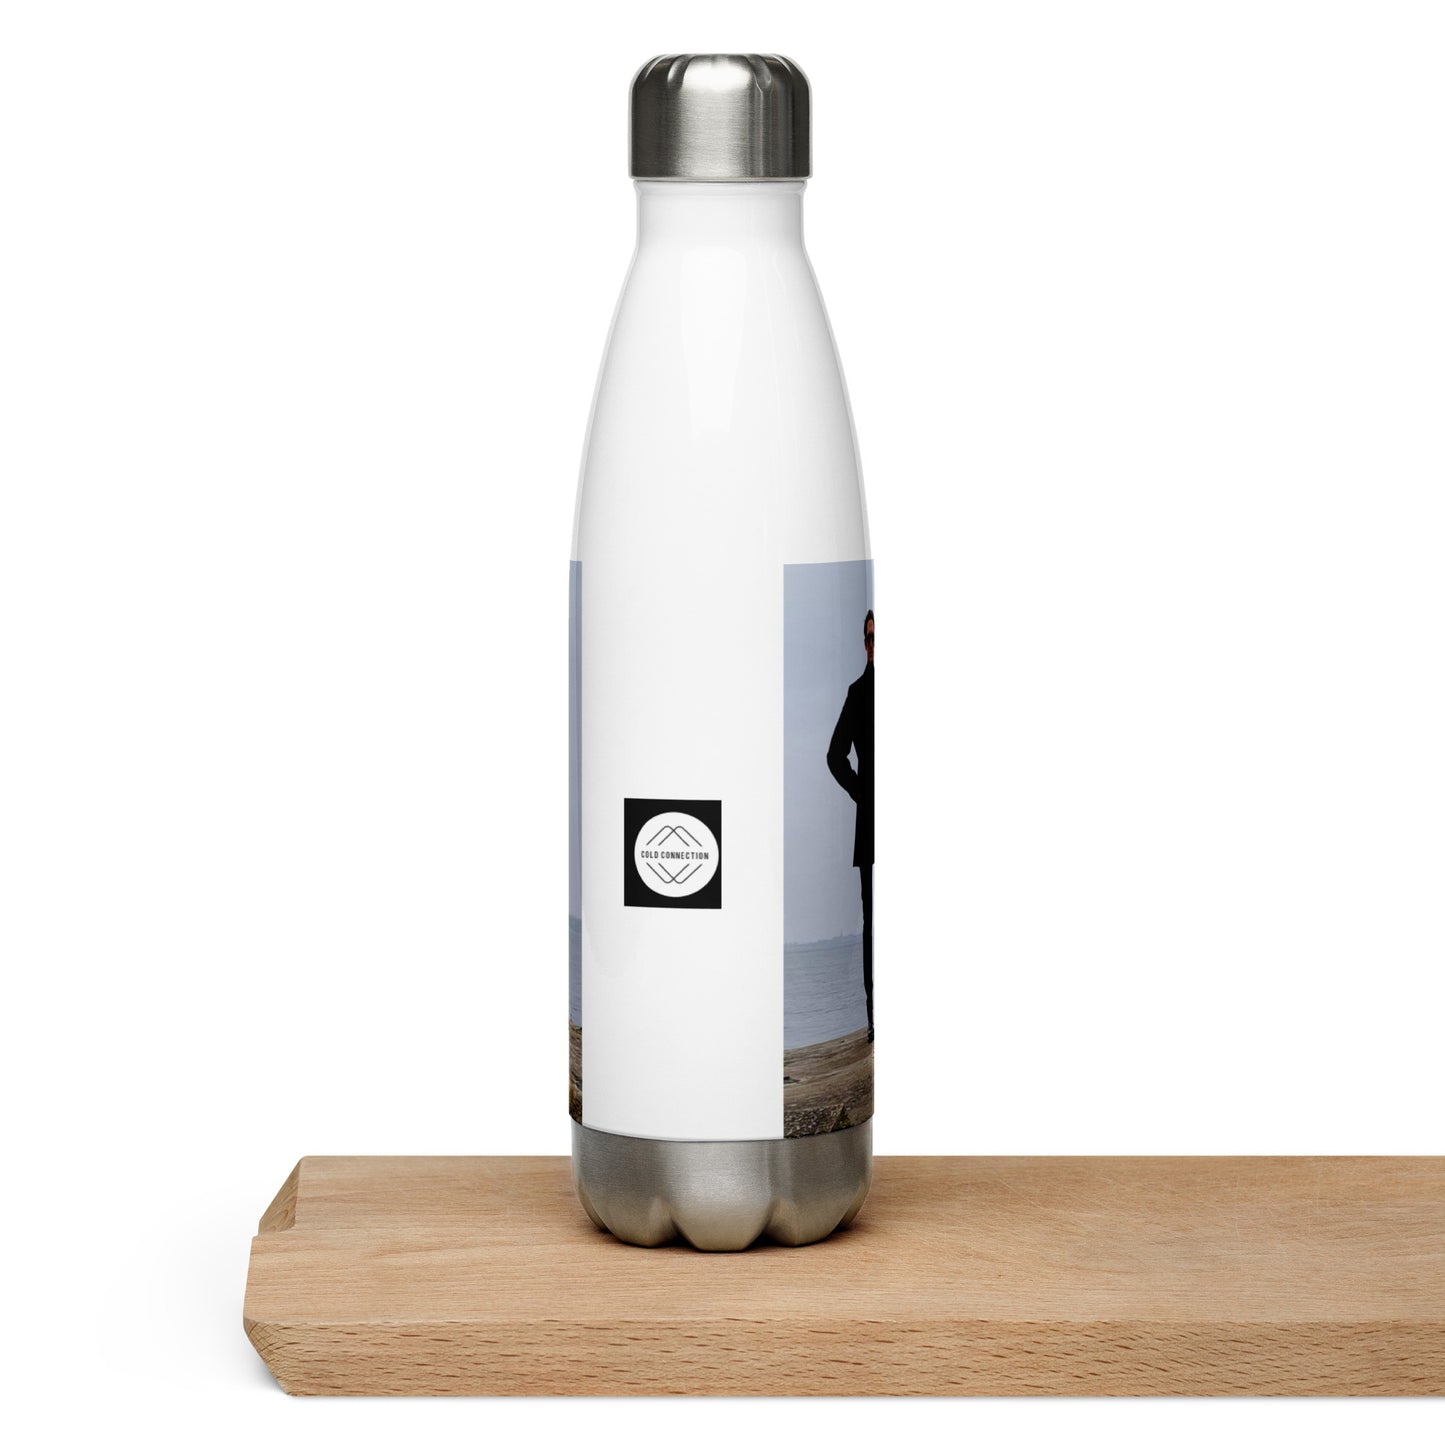 Cold Connection, official band photo and logo, Stainless Steel Water Bottle